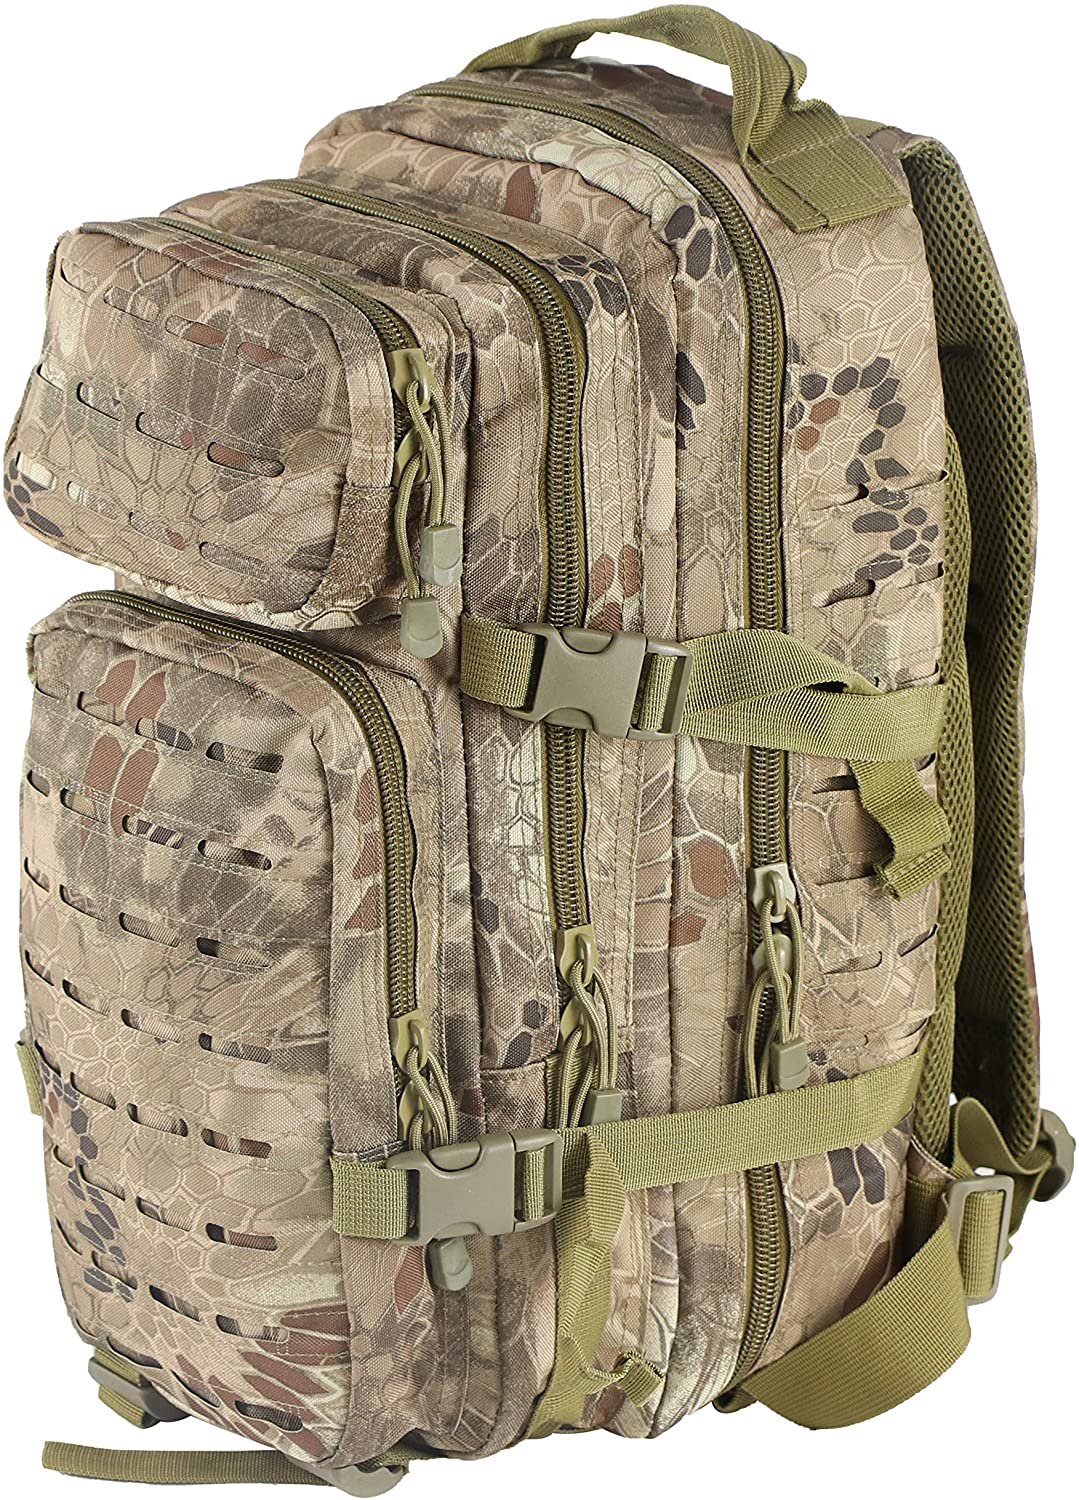 Tactical Backpack Camouflage Rucksack MOLLE/PALS Military Assault Pack Waterproof Backpack 28L